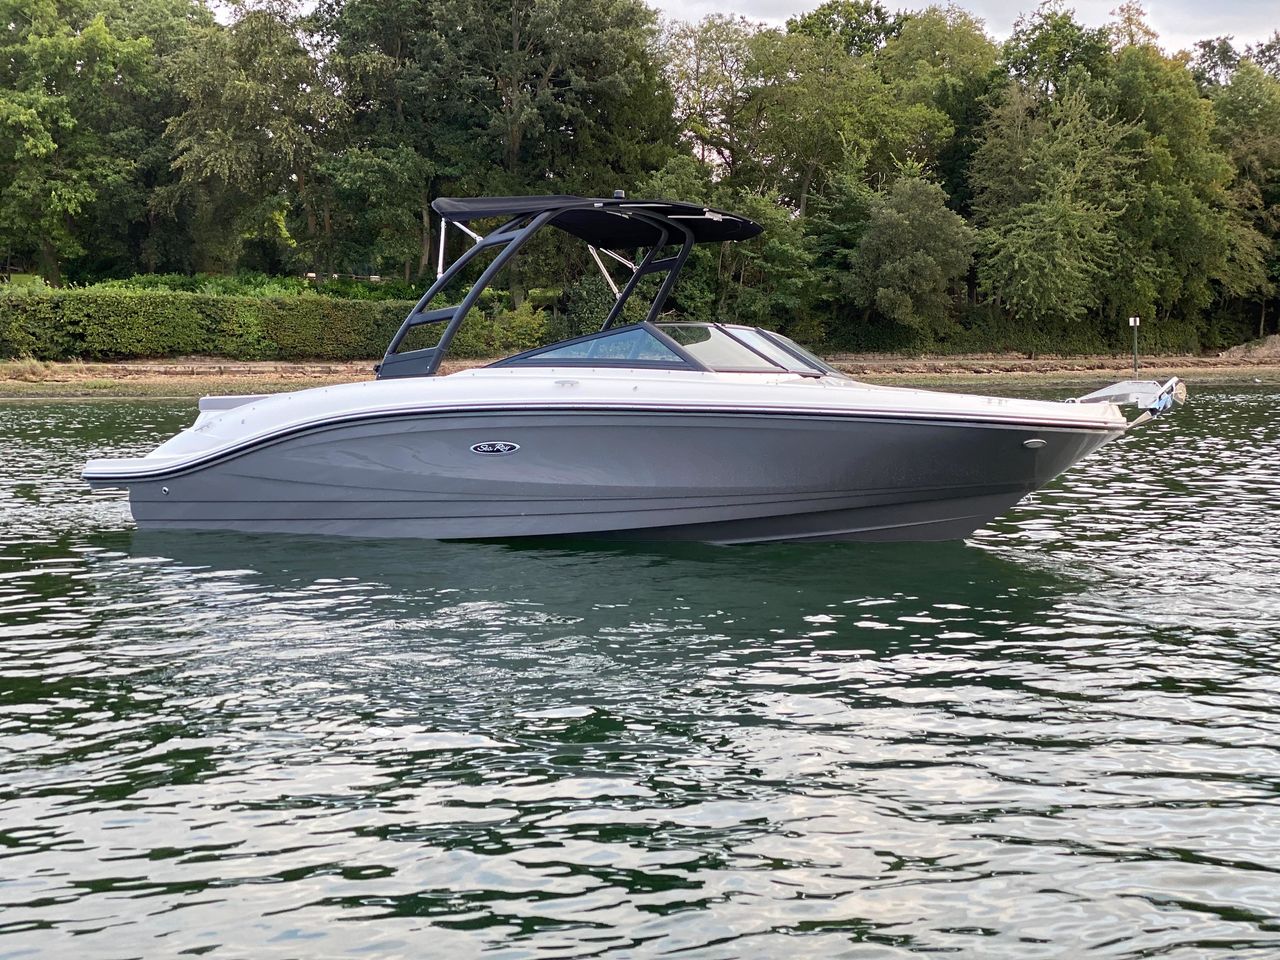 Sea Ray 210 SPXE Wakeedition - picture 2